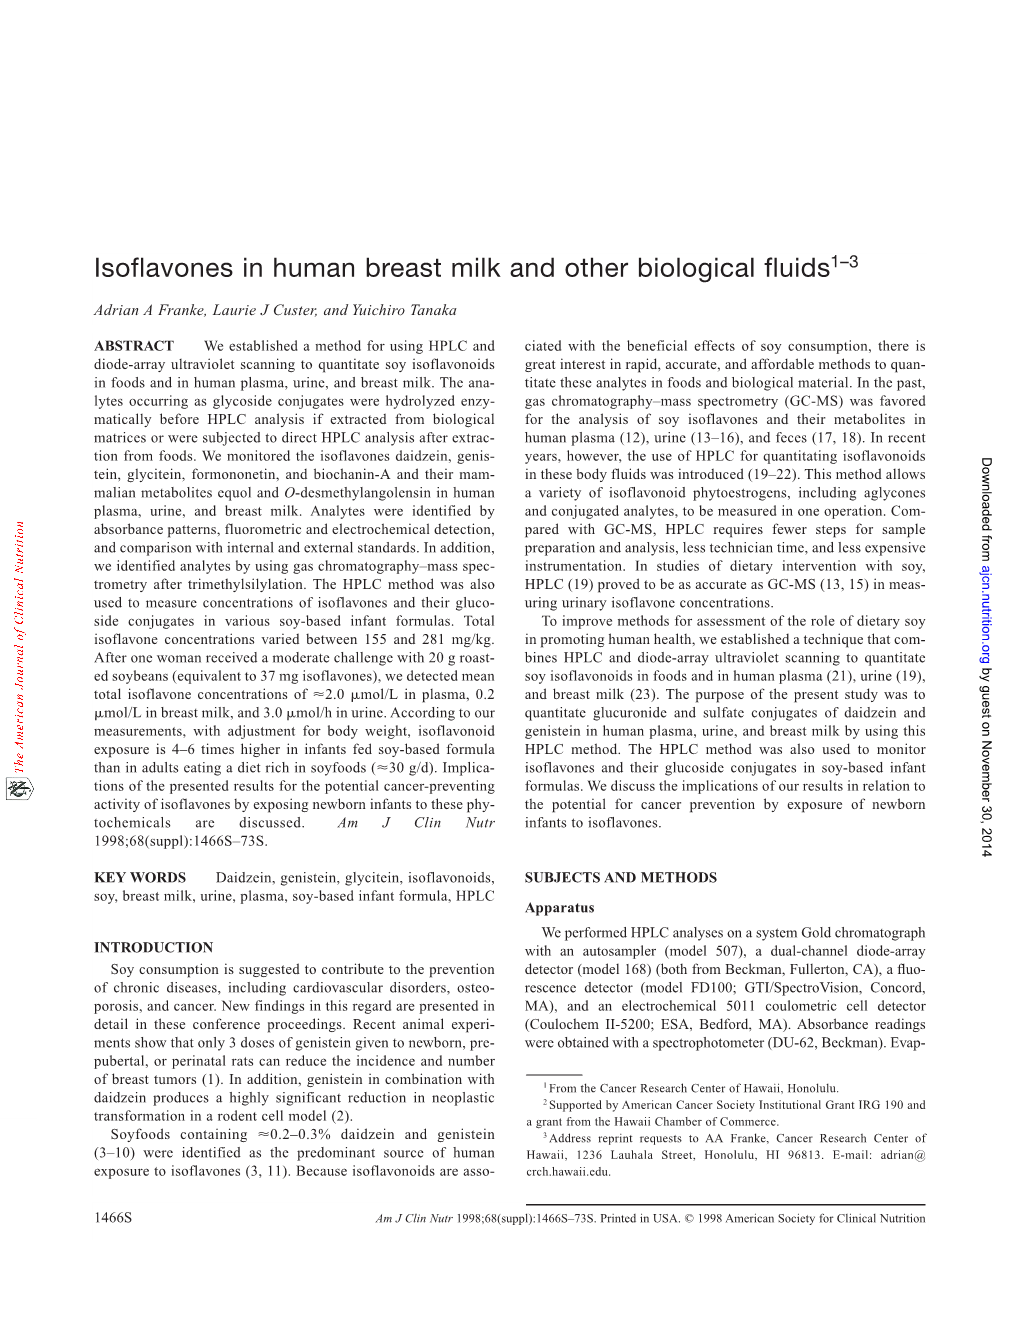 Isoflavones in Human Breast Milk and Other Biological Fluids1–3